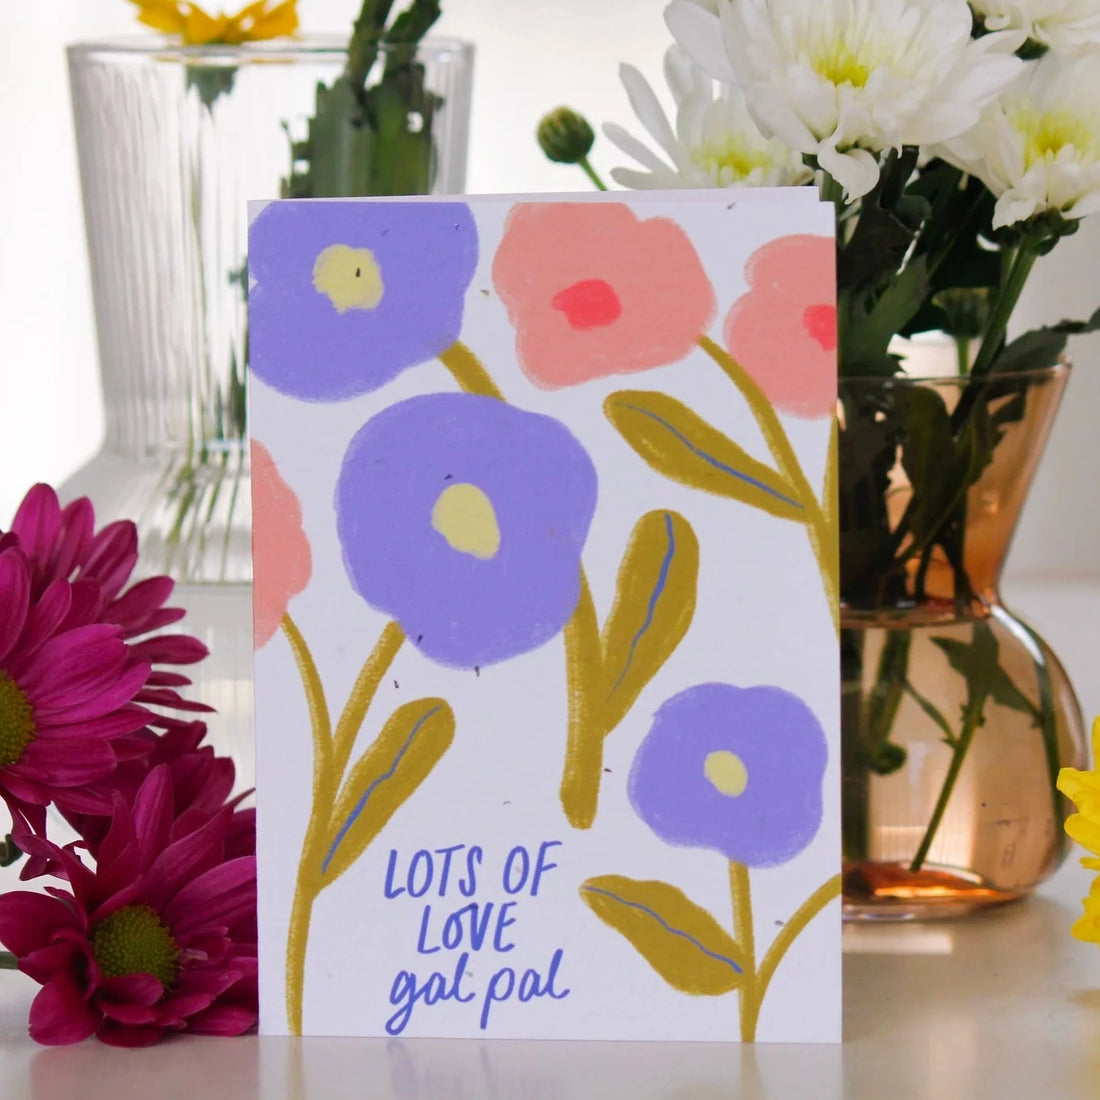 Blooming Card - Seeded Plantable Greeting Card by Hello Petal - Lots of Love